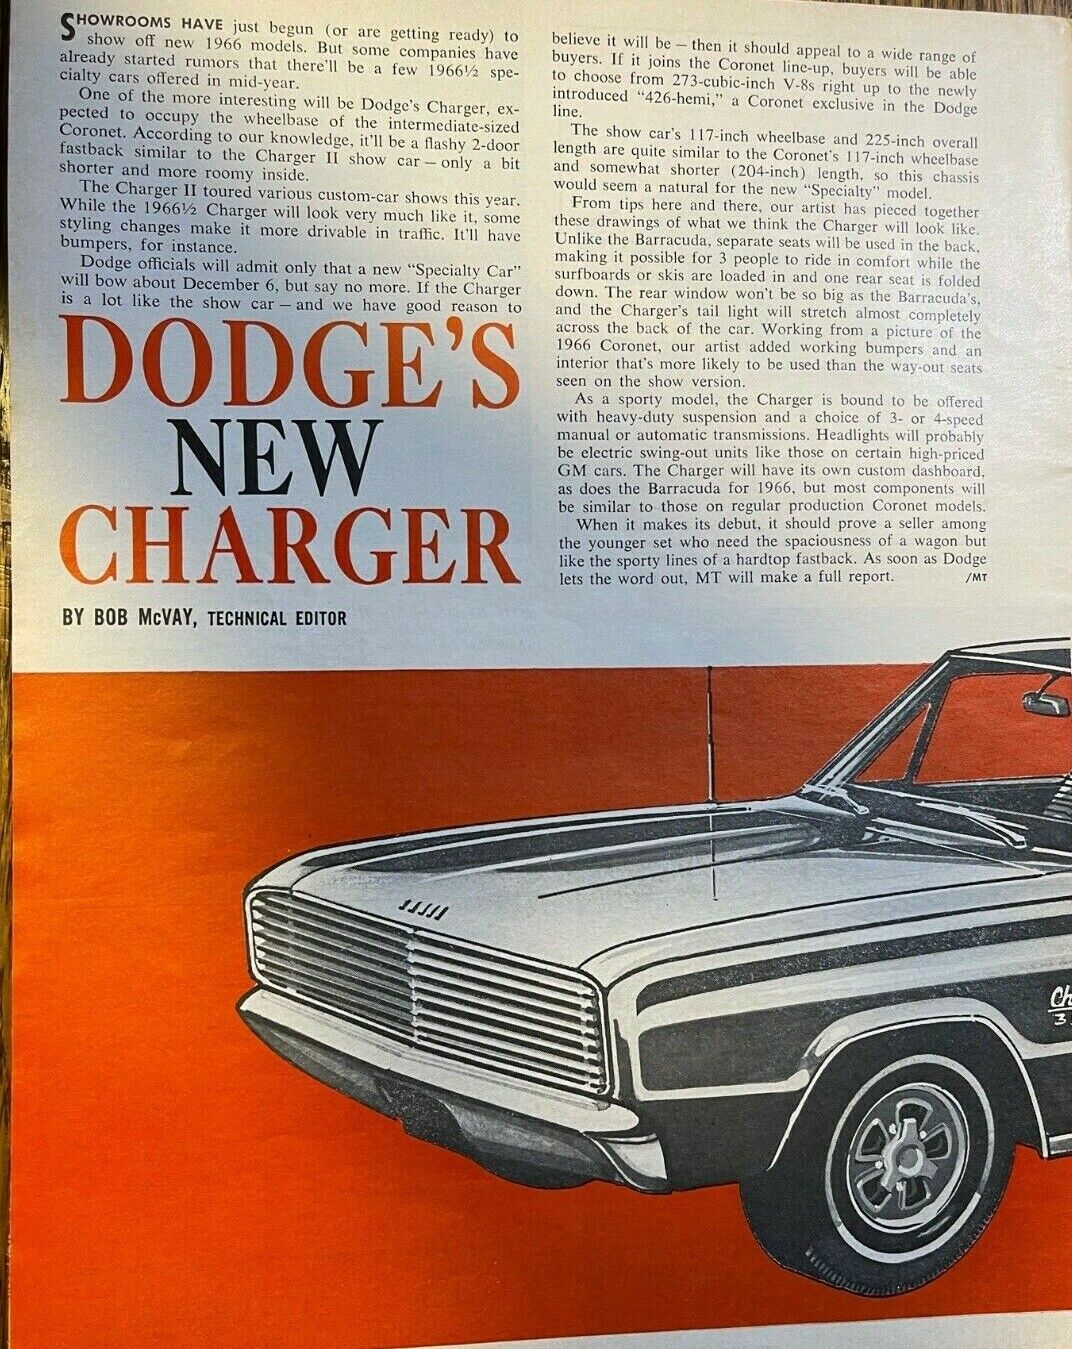 Road Test 1965 Dodge Charger illustrated